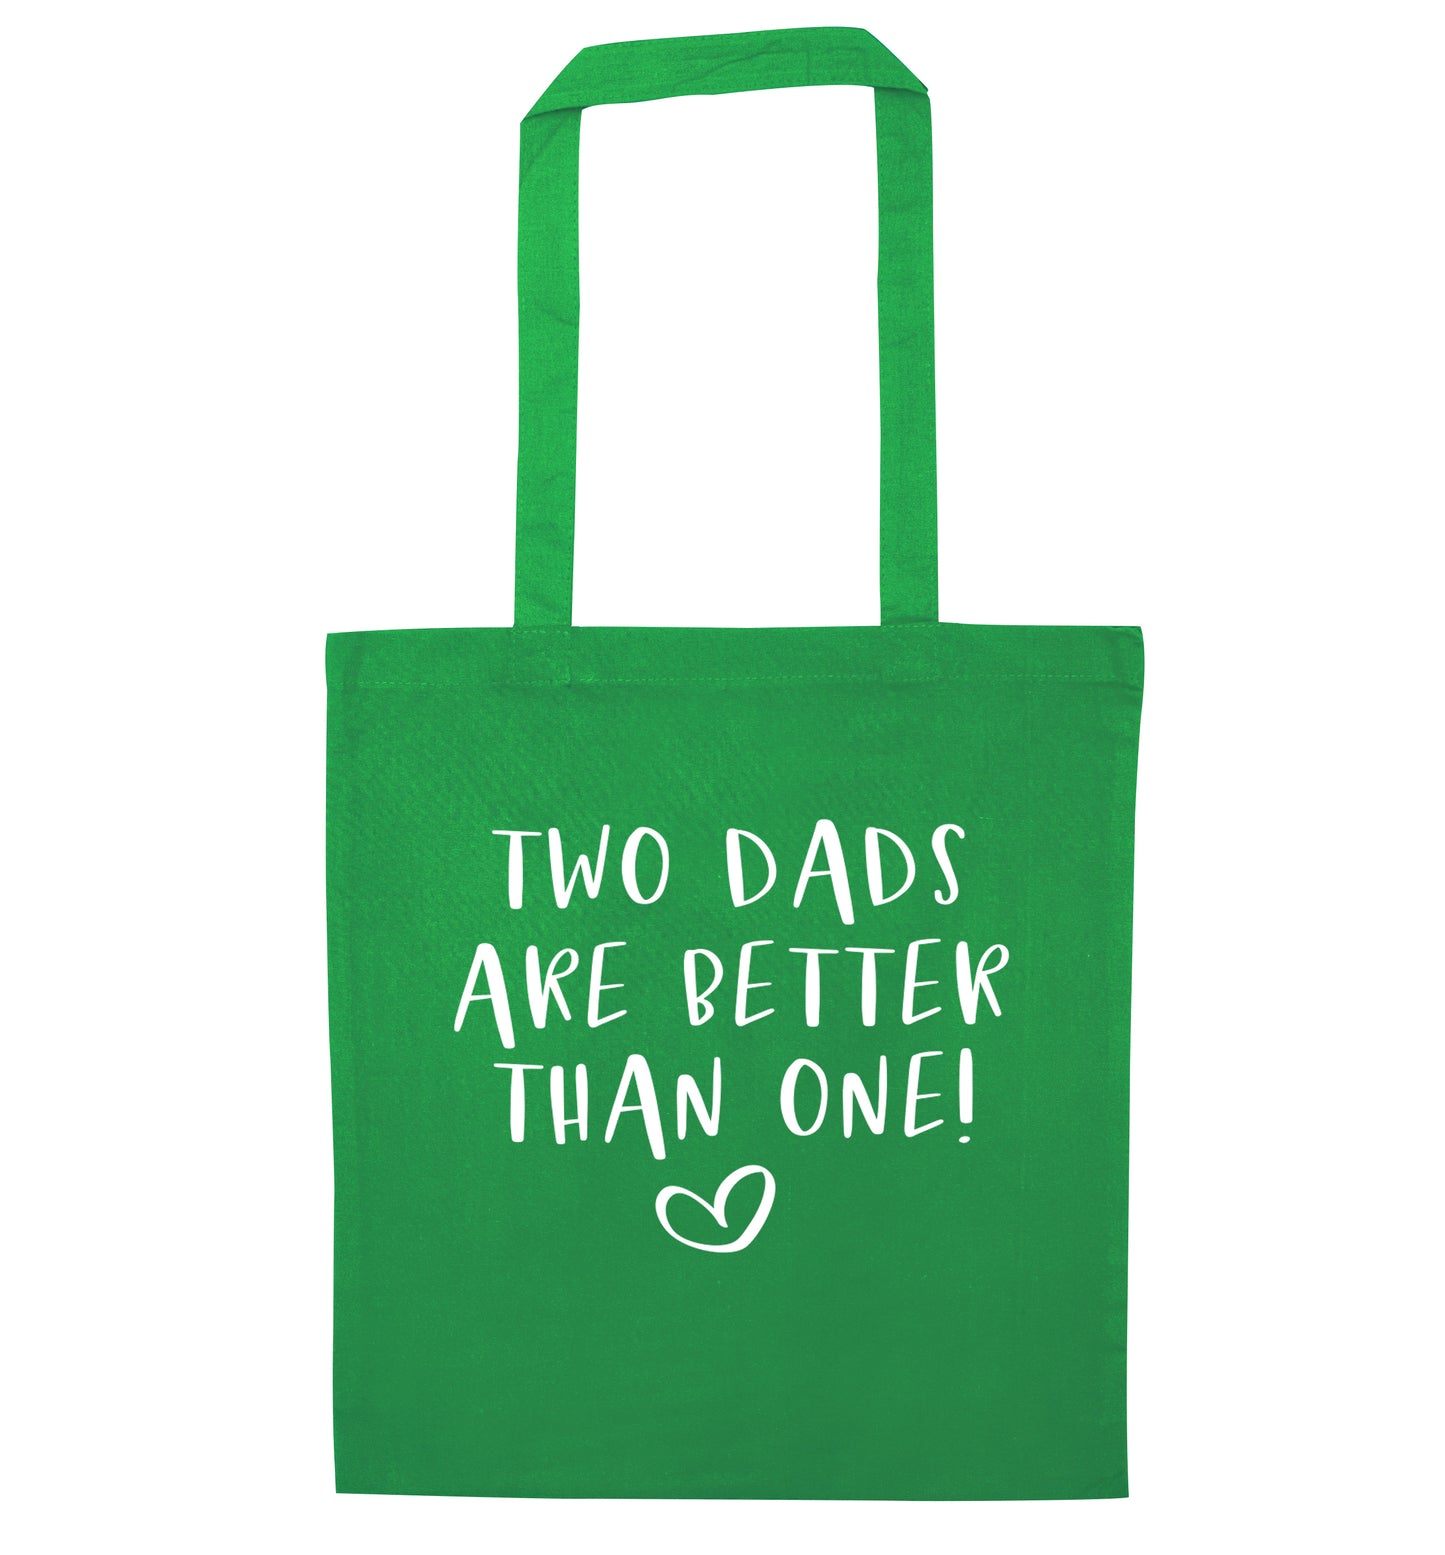 Two dads are better than one green tote bag